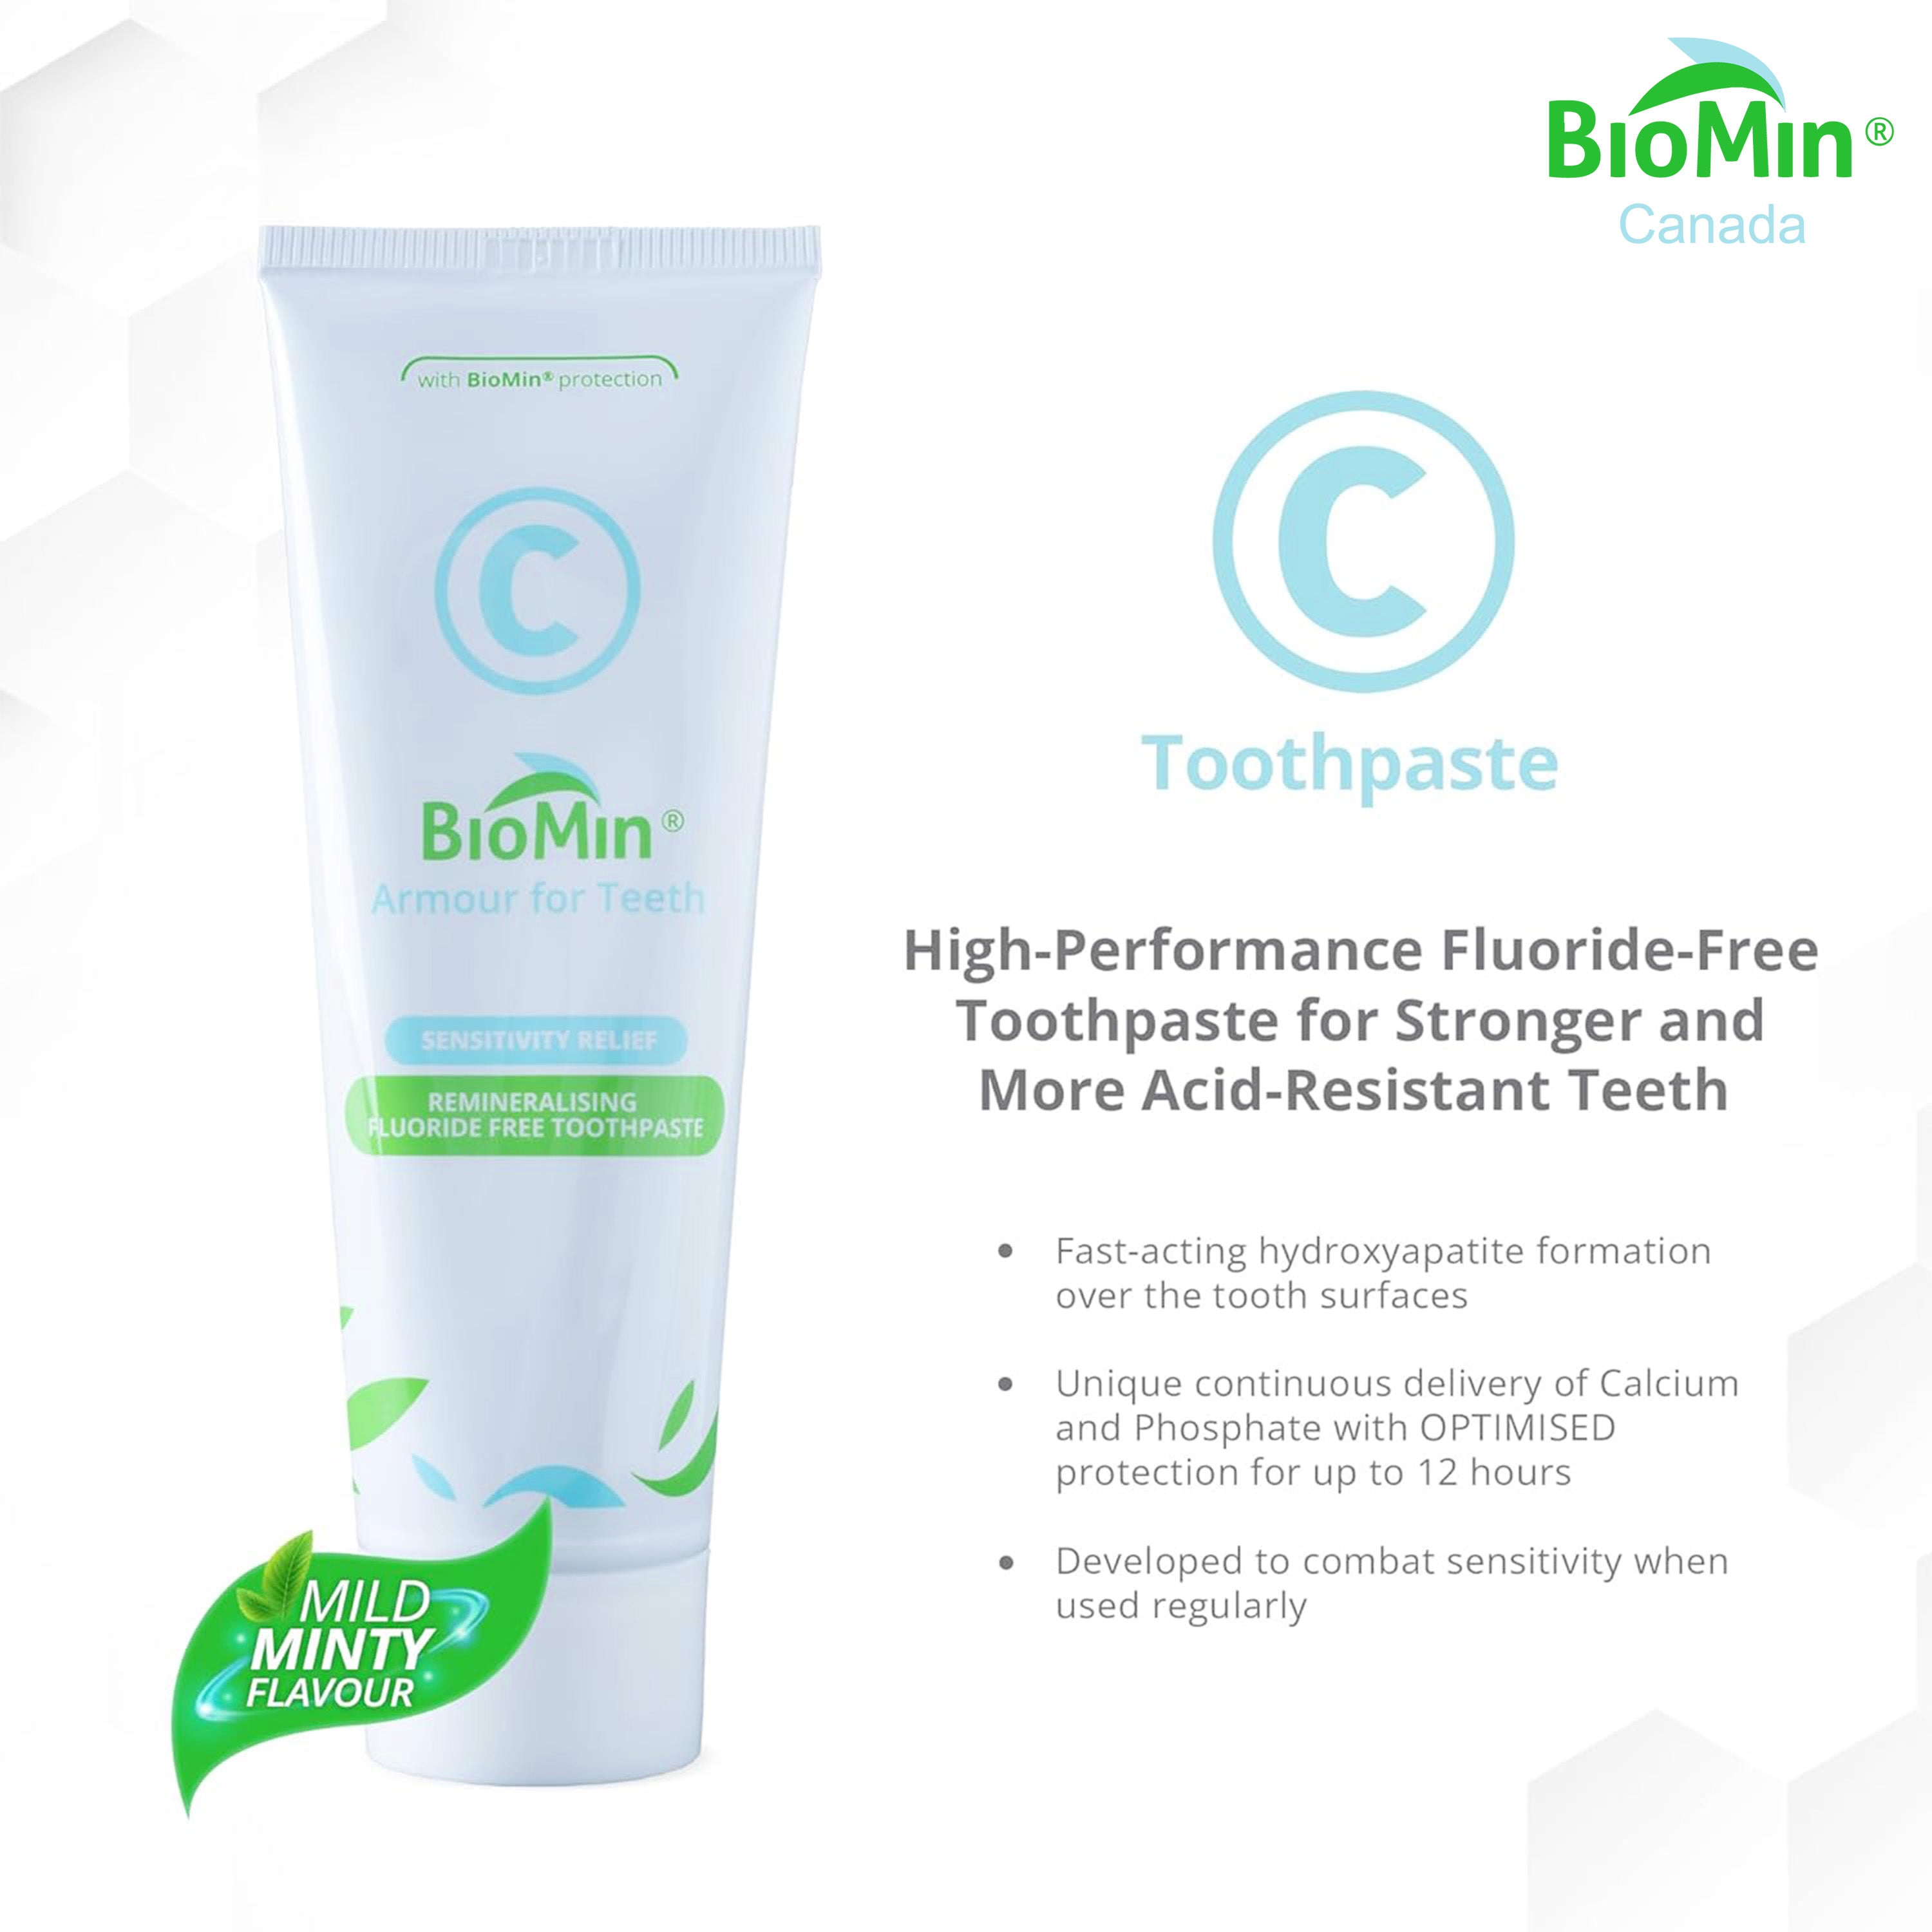 BioMin C 8 Pack + Bundle Discount + Low Flat Shipping Rates